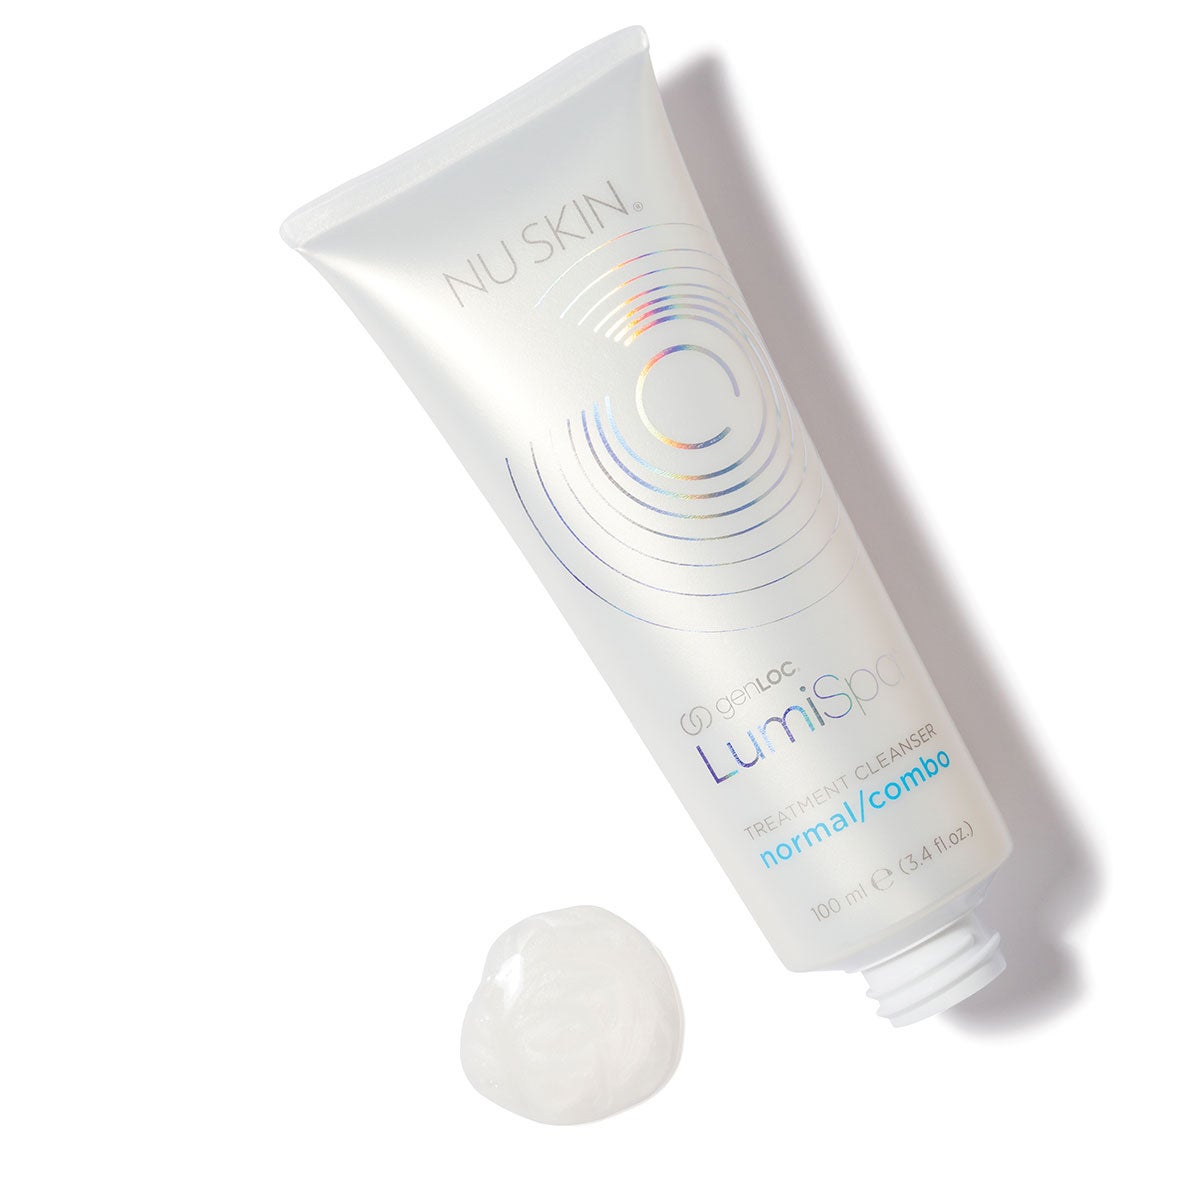 ageLOC® LumiSpa® Cleanser (Normal/Combo)Buy
* Discount will apply at checkout. 
Specifically formulated to enable the precise cushioning, cleansing, and interaction with the skin, optimizing the effectivenageLOC® LumiSpa® Cleanser (Normal/Combo)